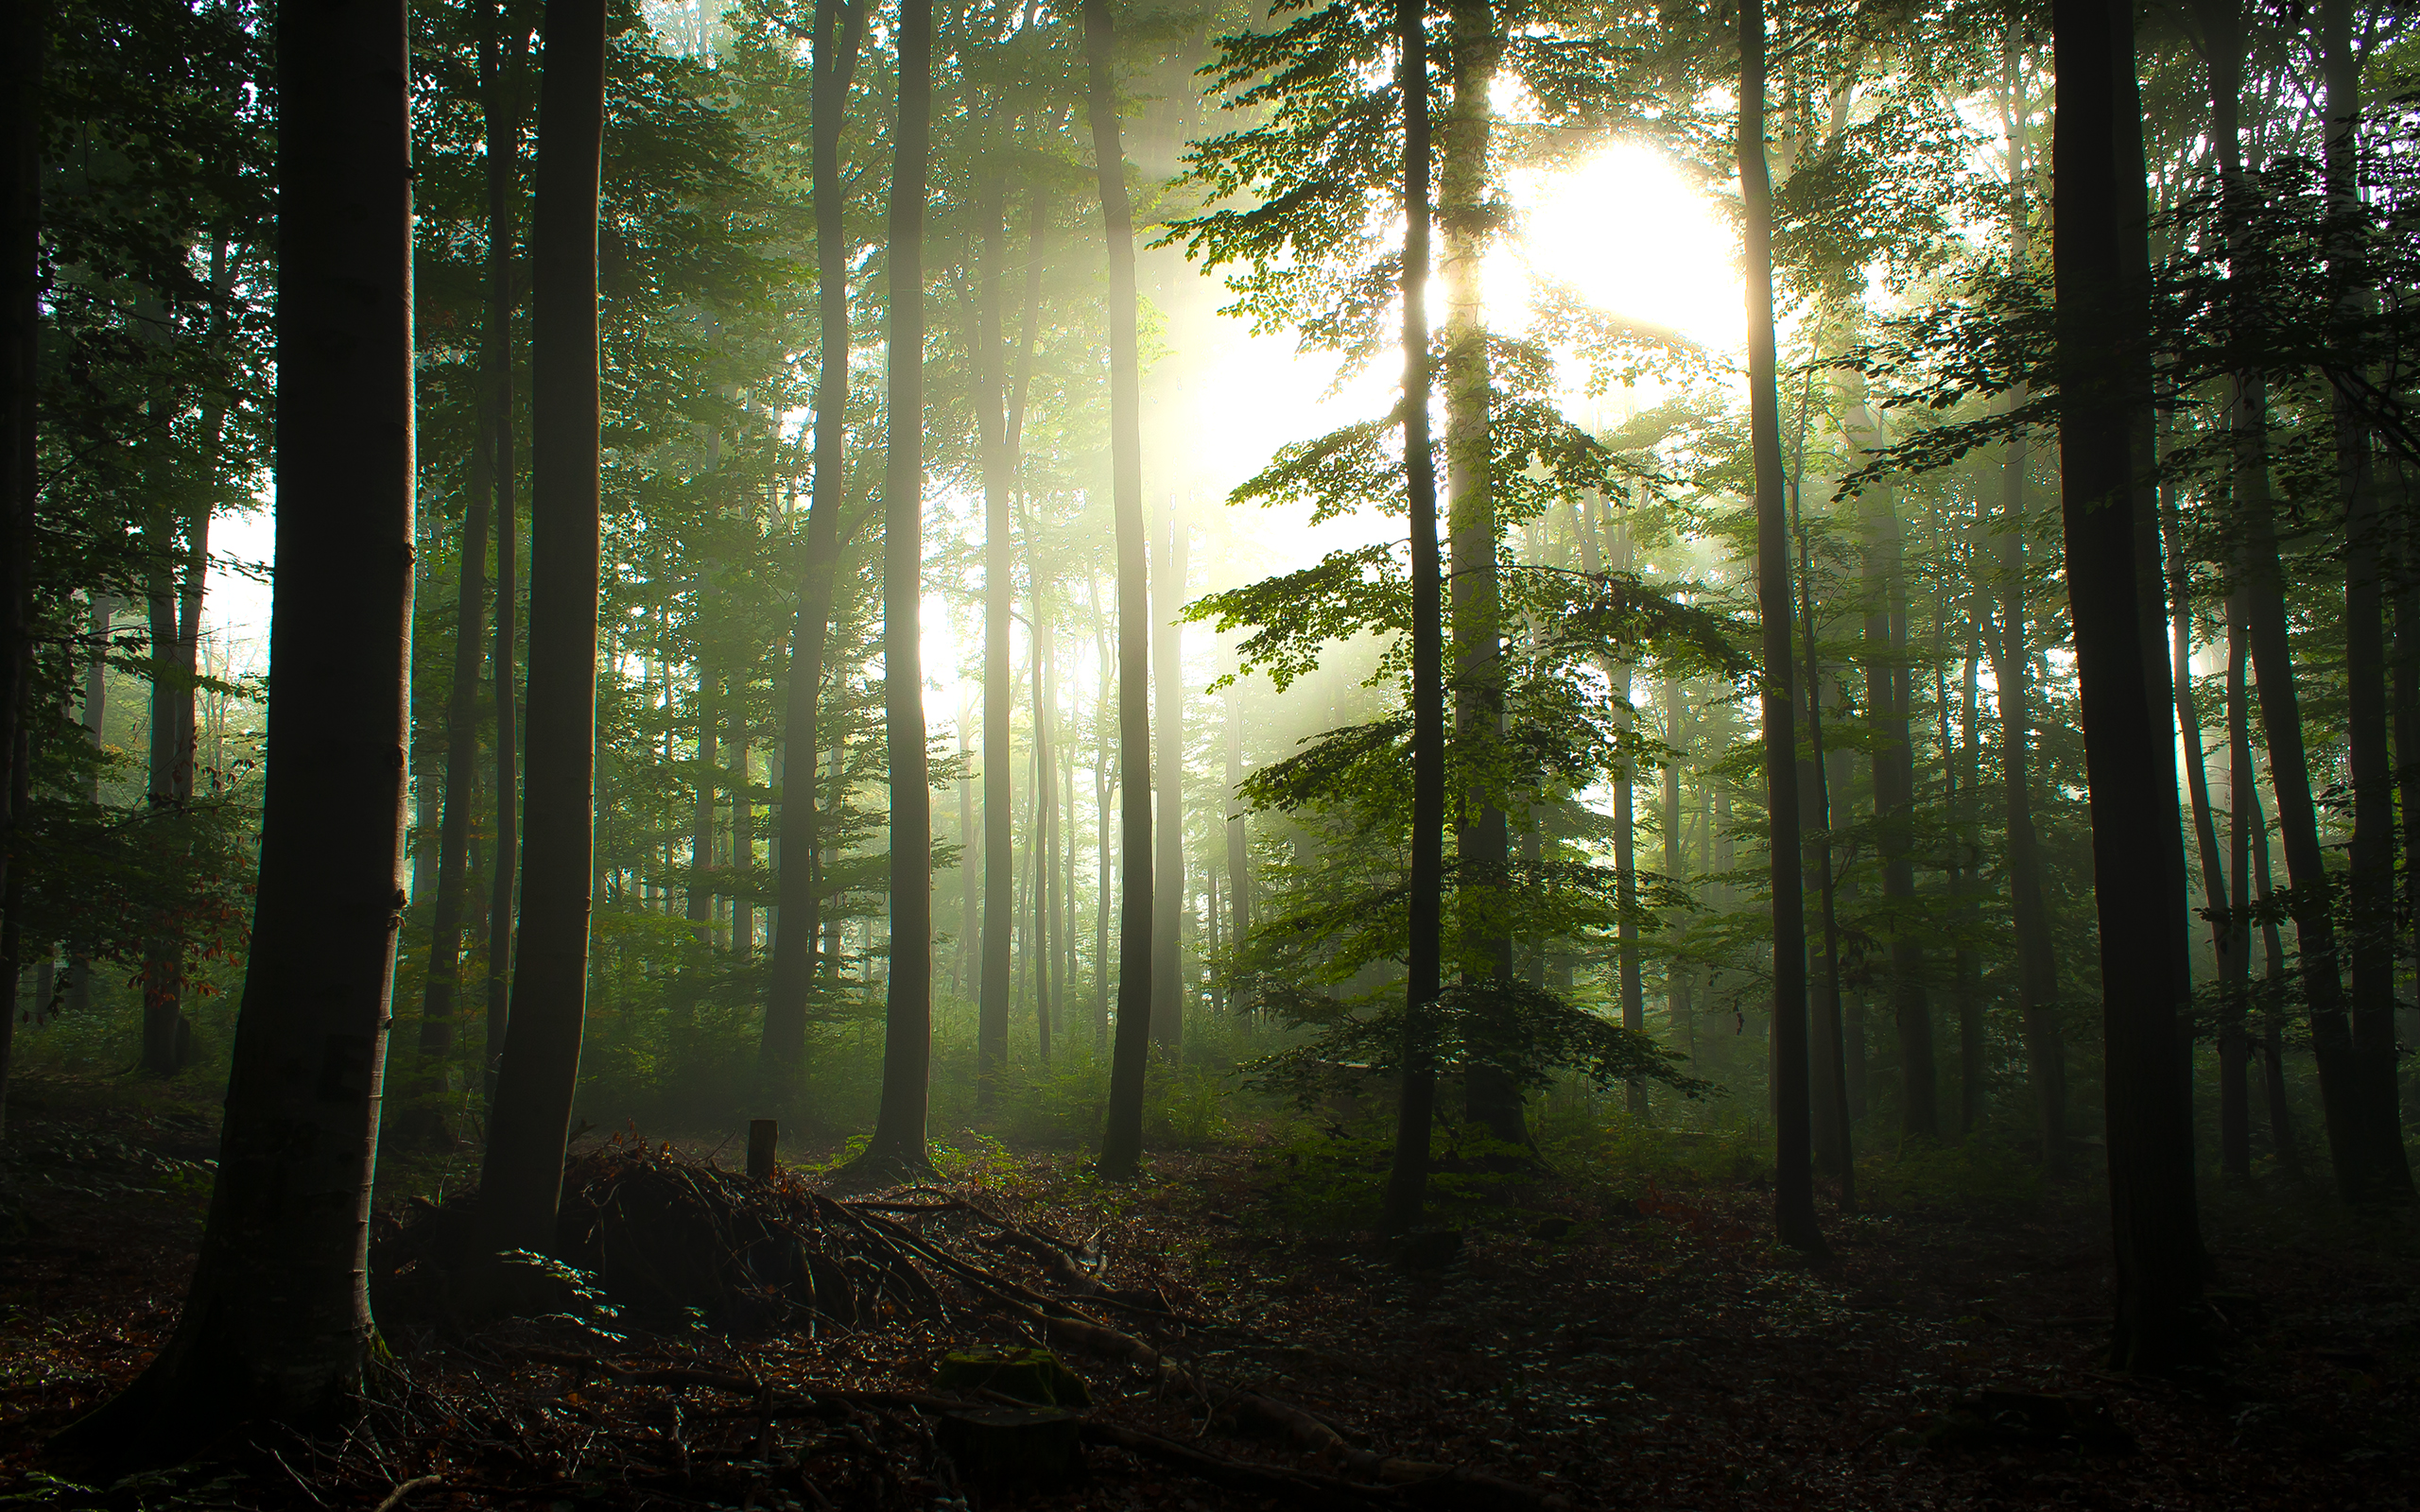 General 2560x1600 forest pine trees trees nature